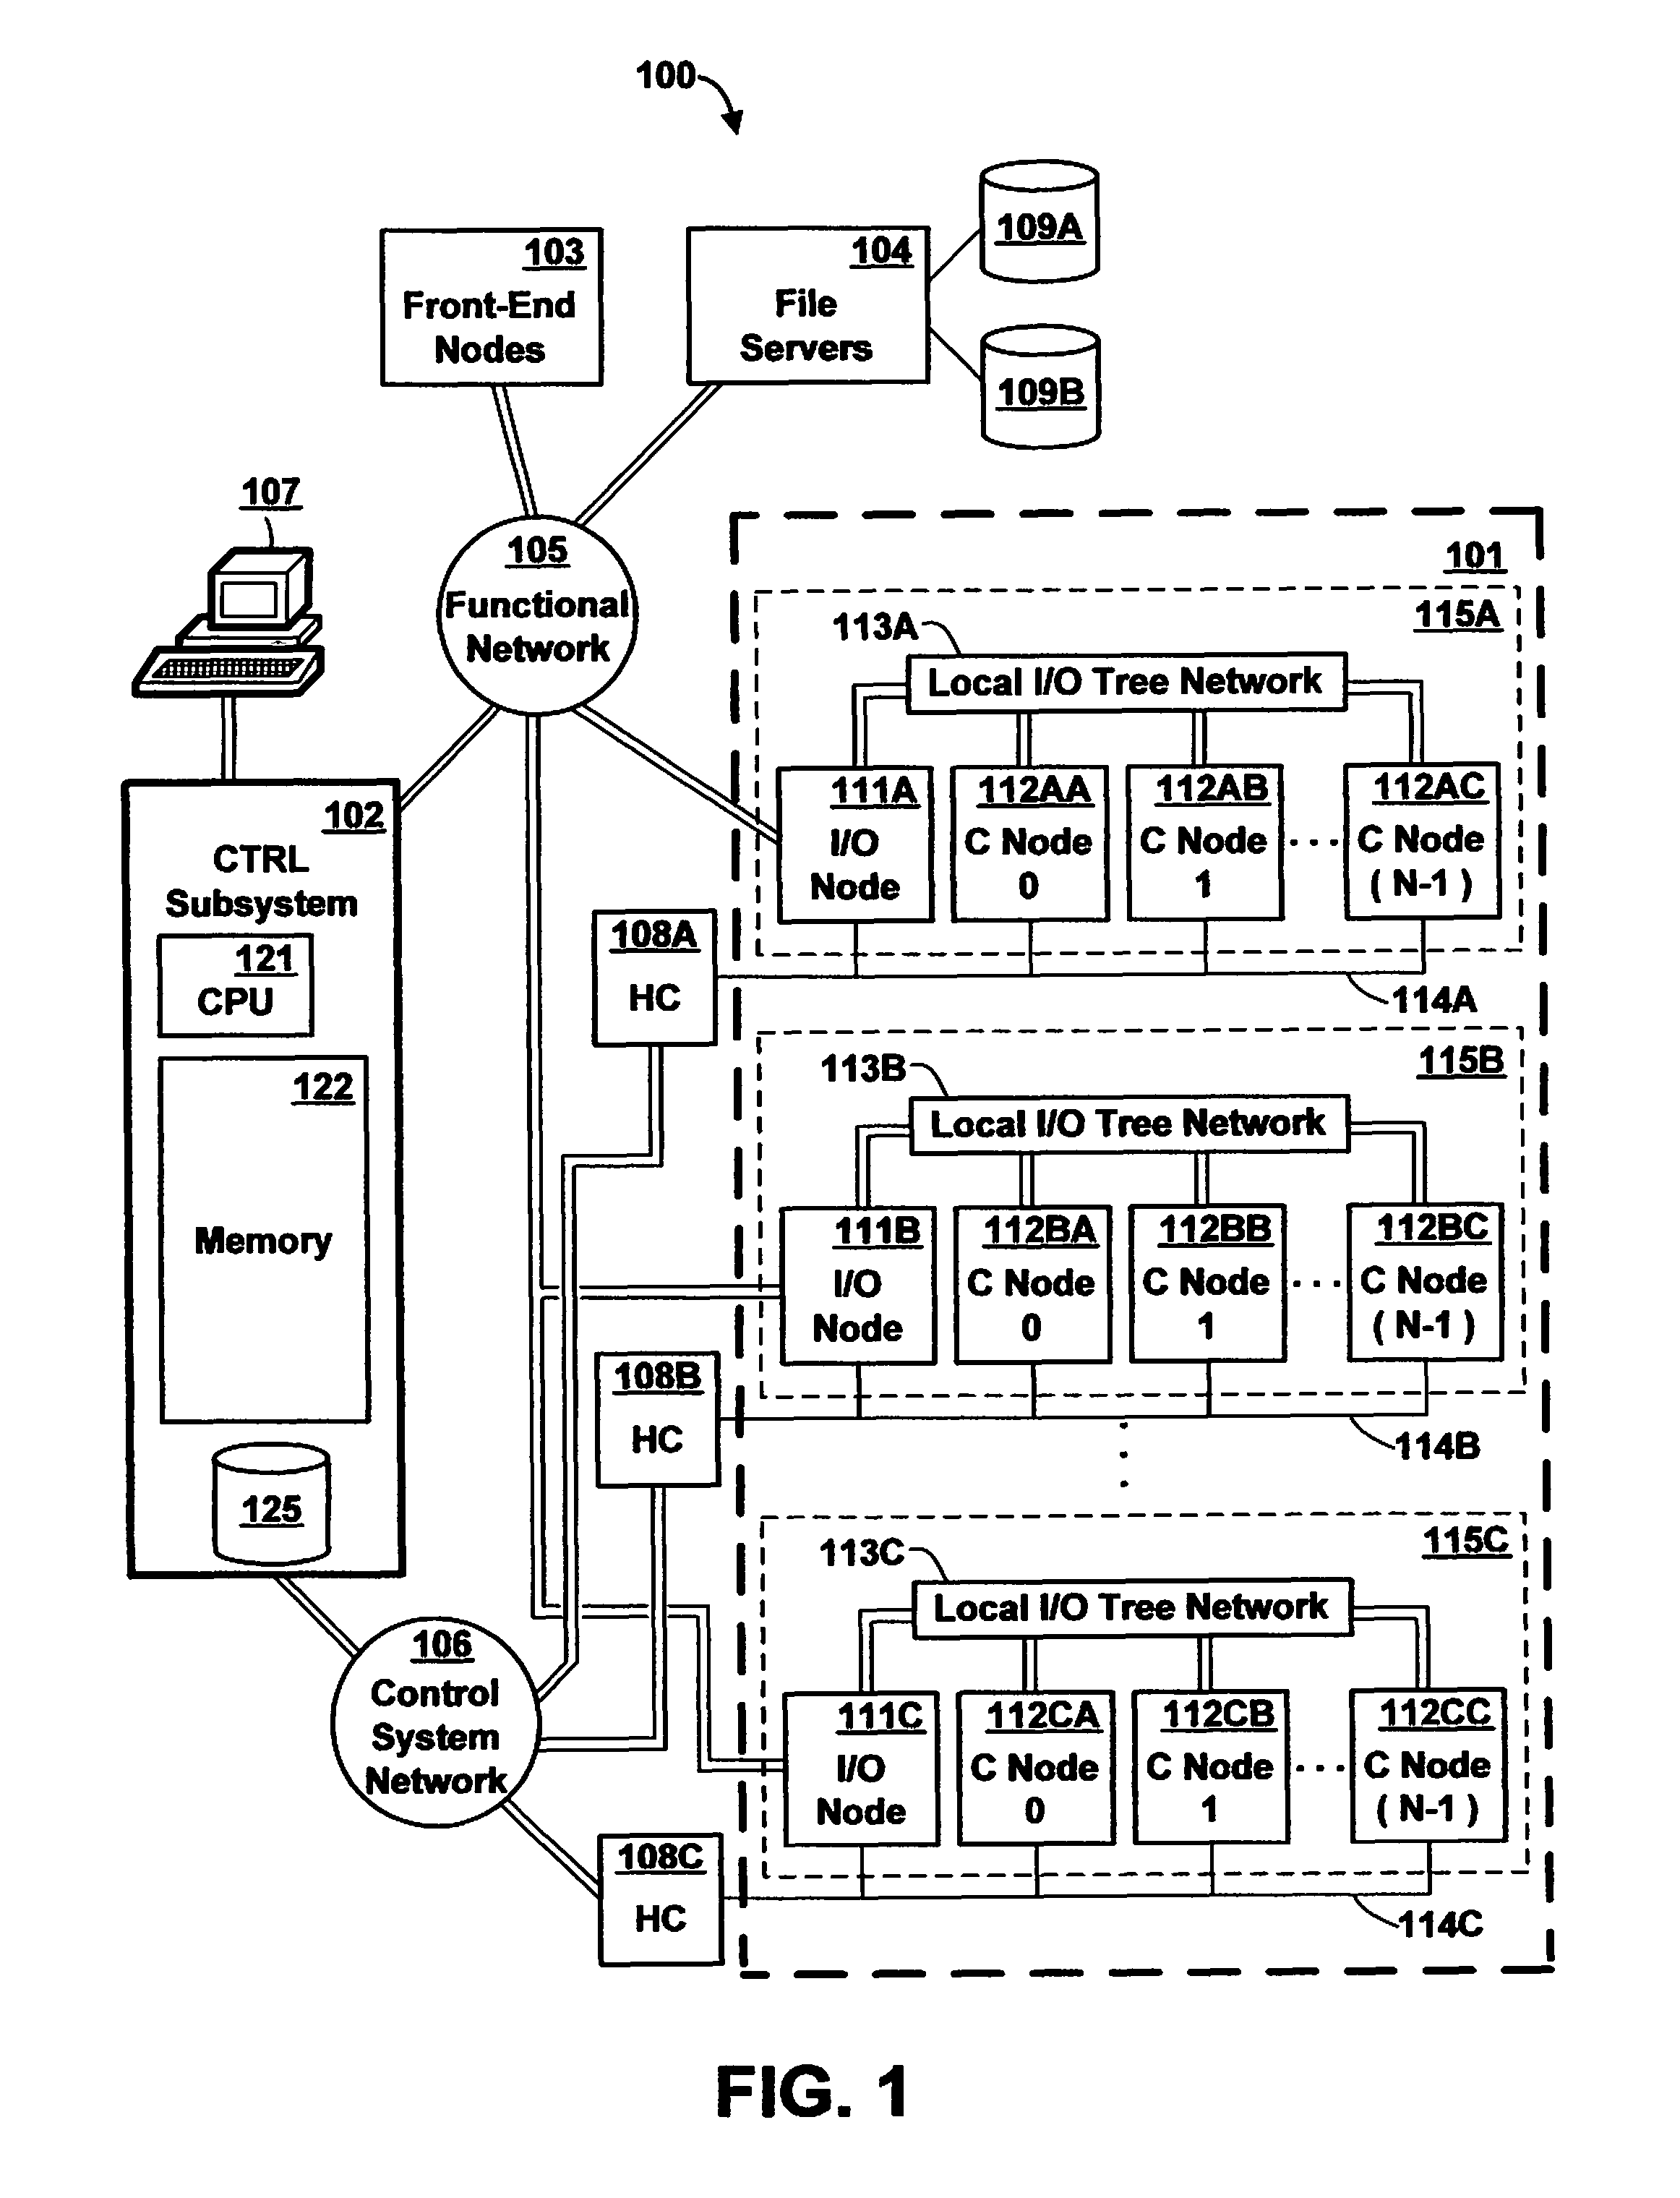 Method and apparatus for routing data in an inter-nodal communications lattice of a massively parallel computer system by routing through transporter nodes